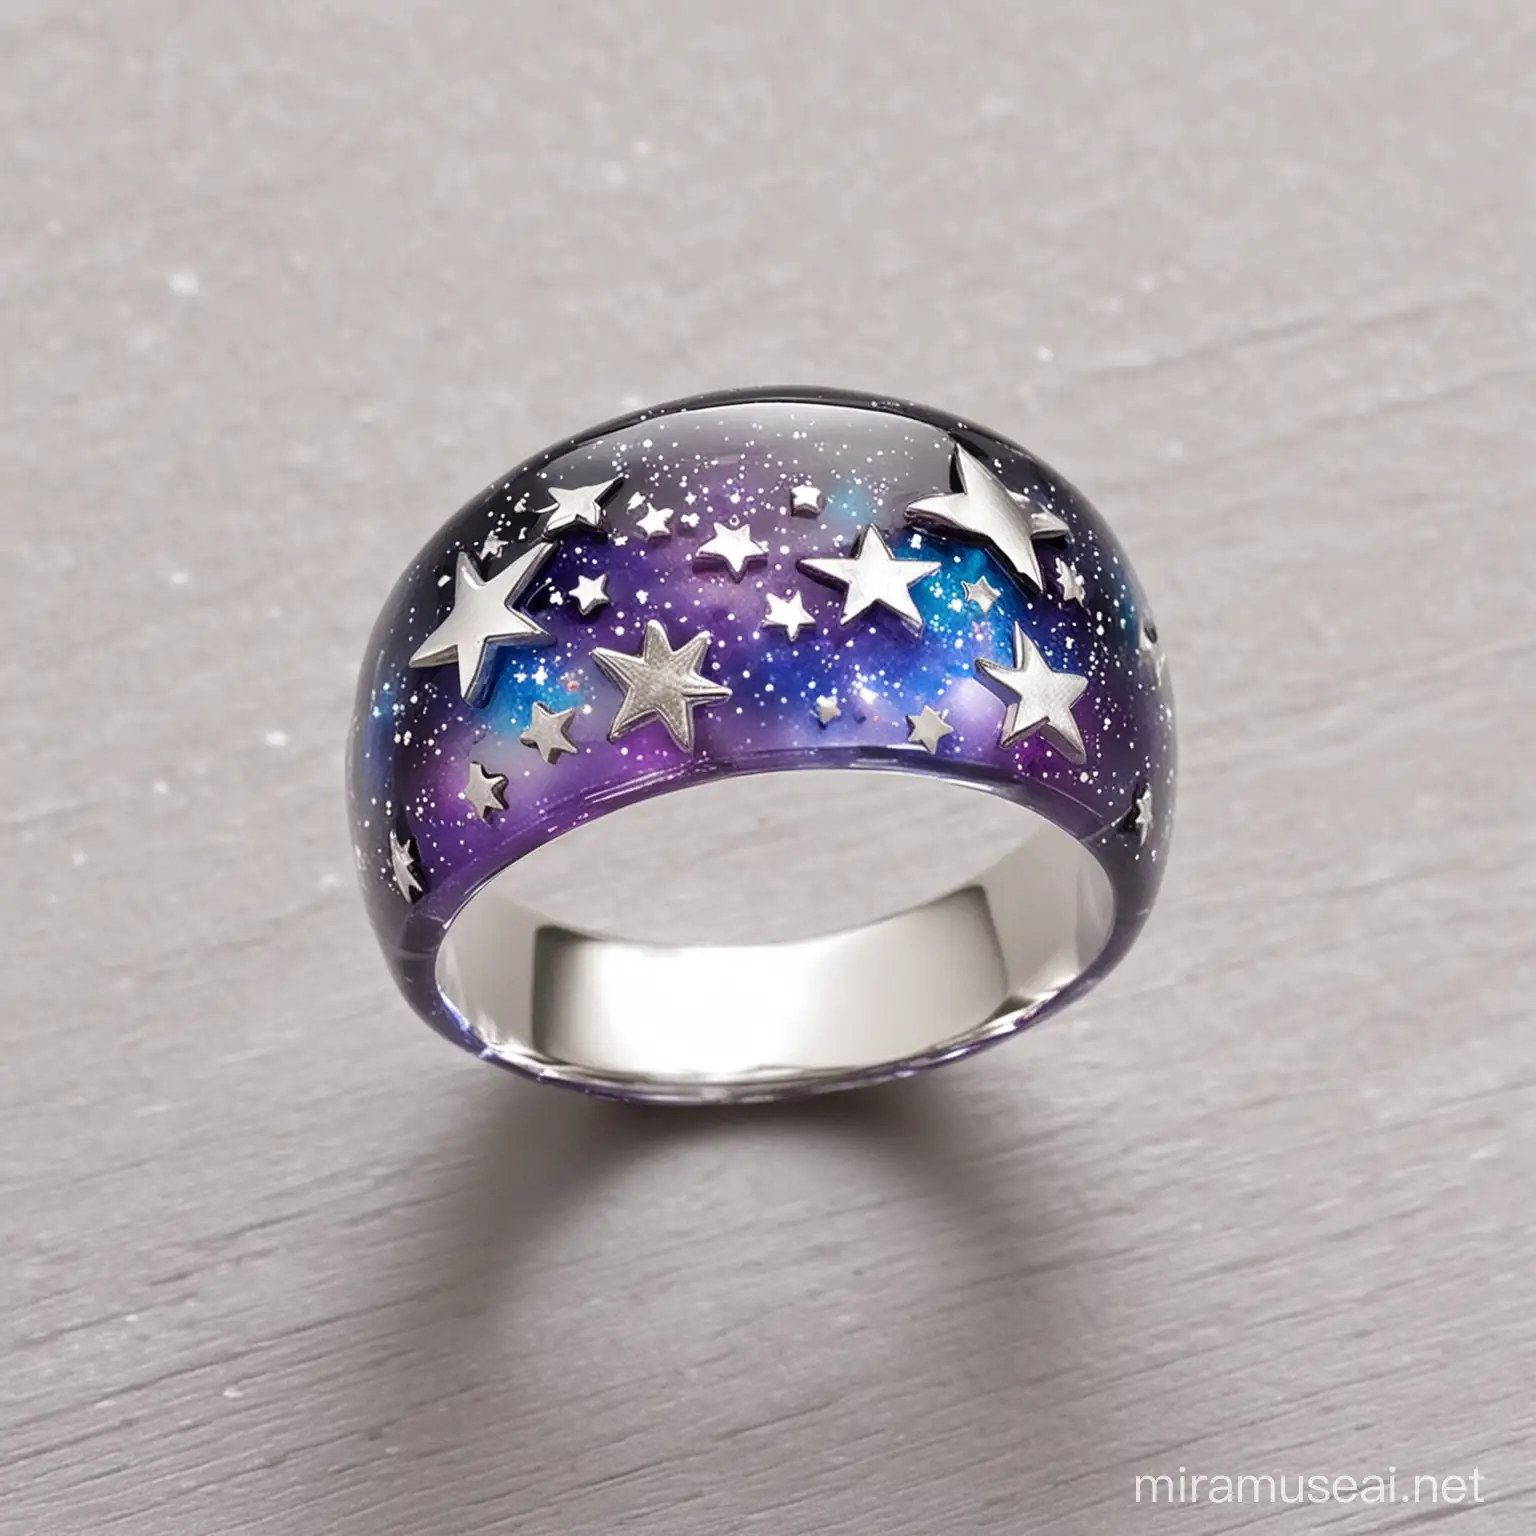 resin ring with a galaxy color effect and silver stars